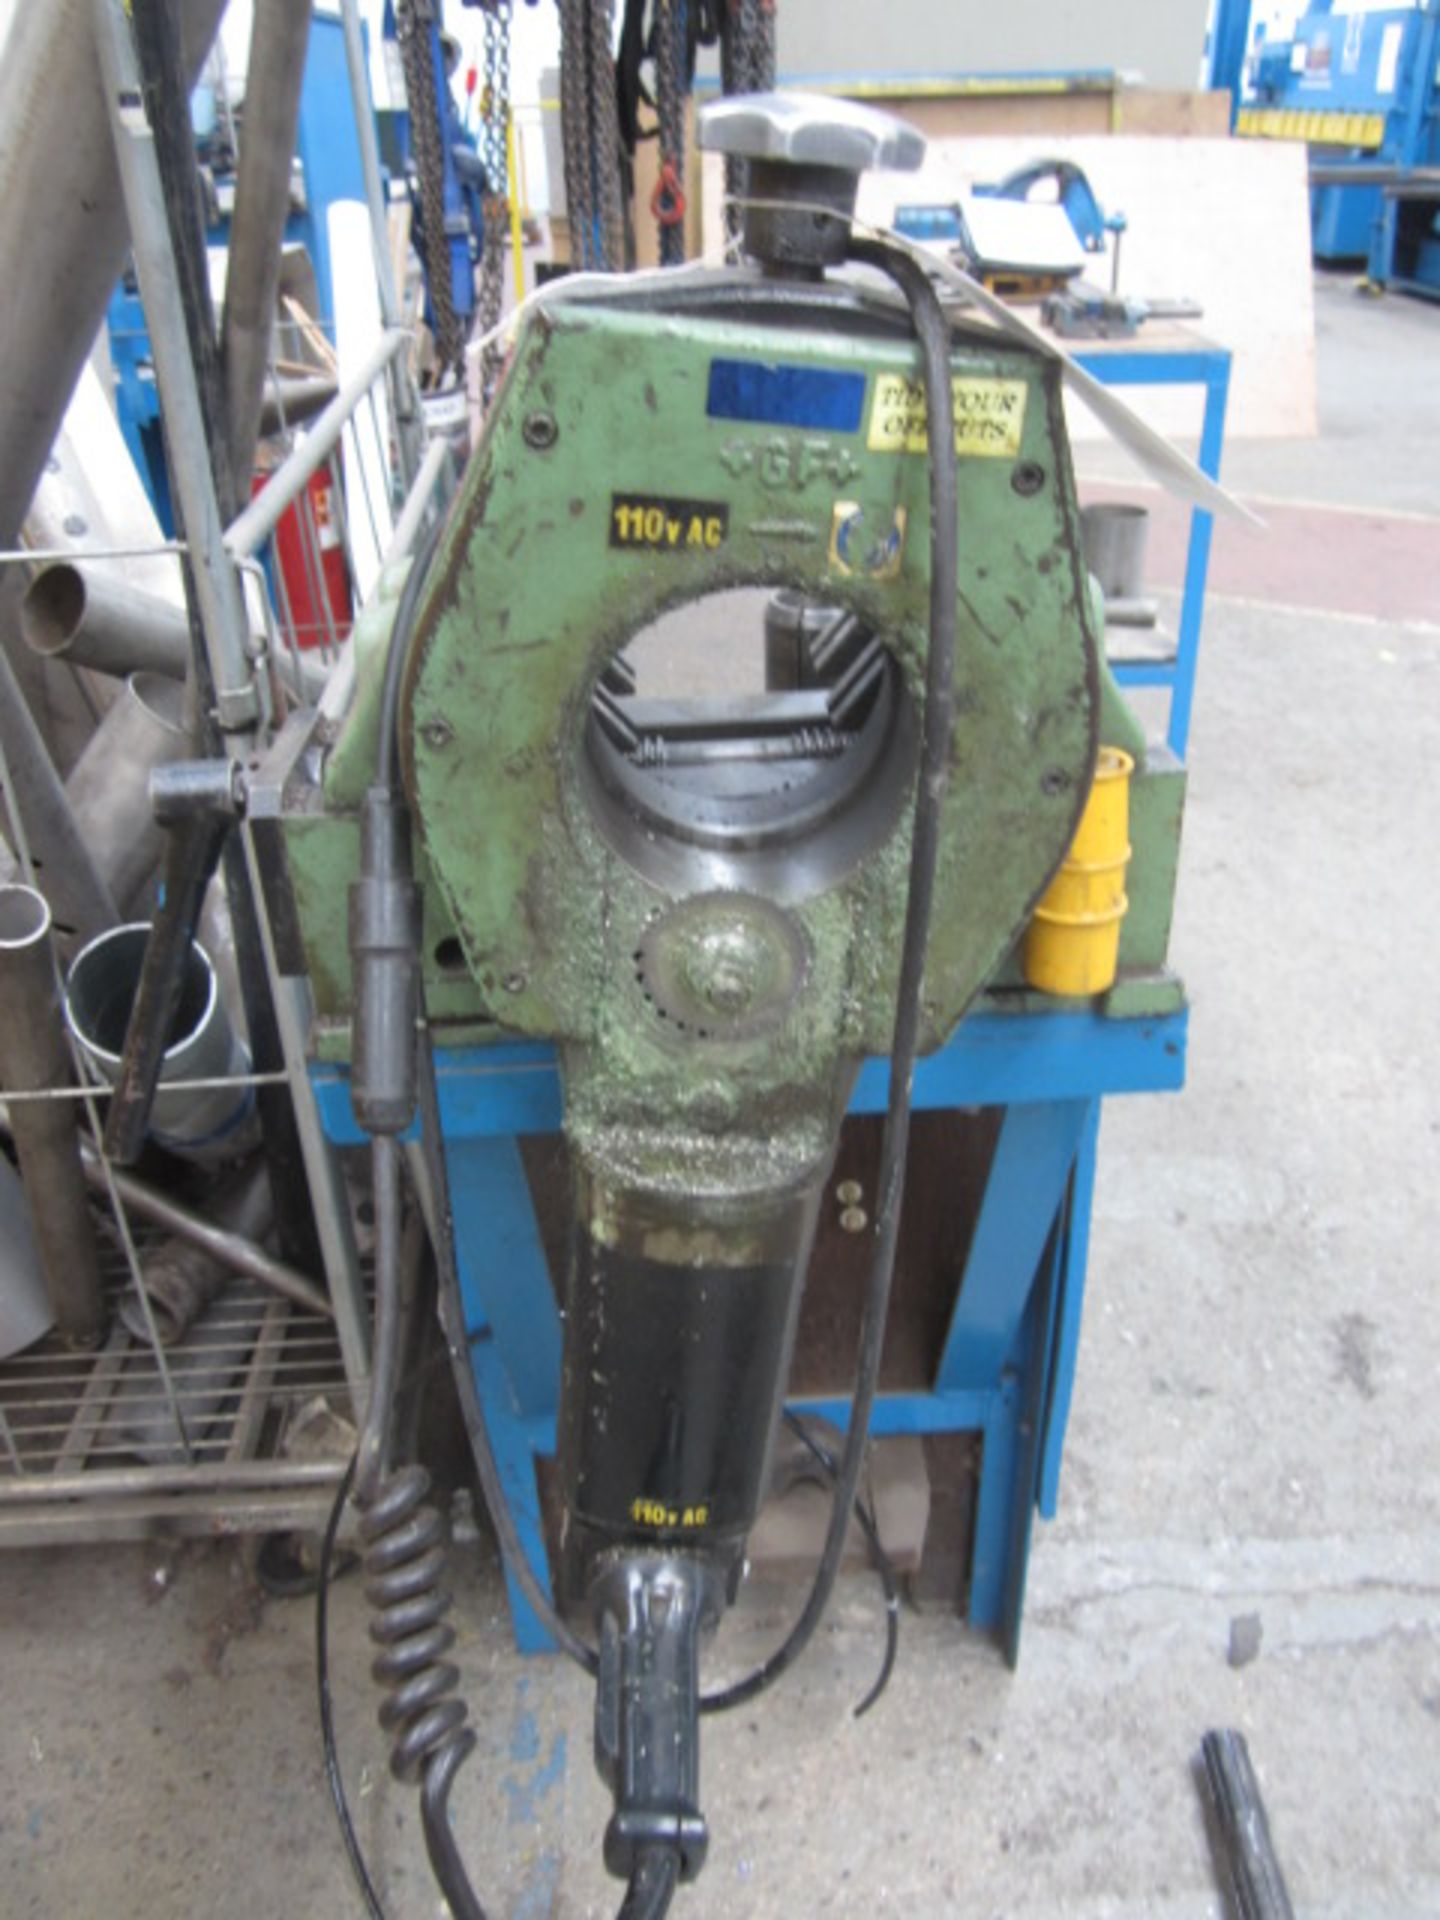 Georg Fischer pipe cutter, approx. cutting diameter 120mm,110v mounted on work bench.